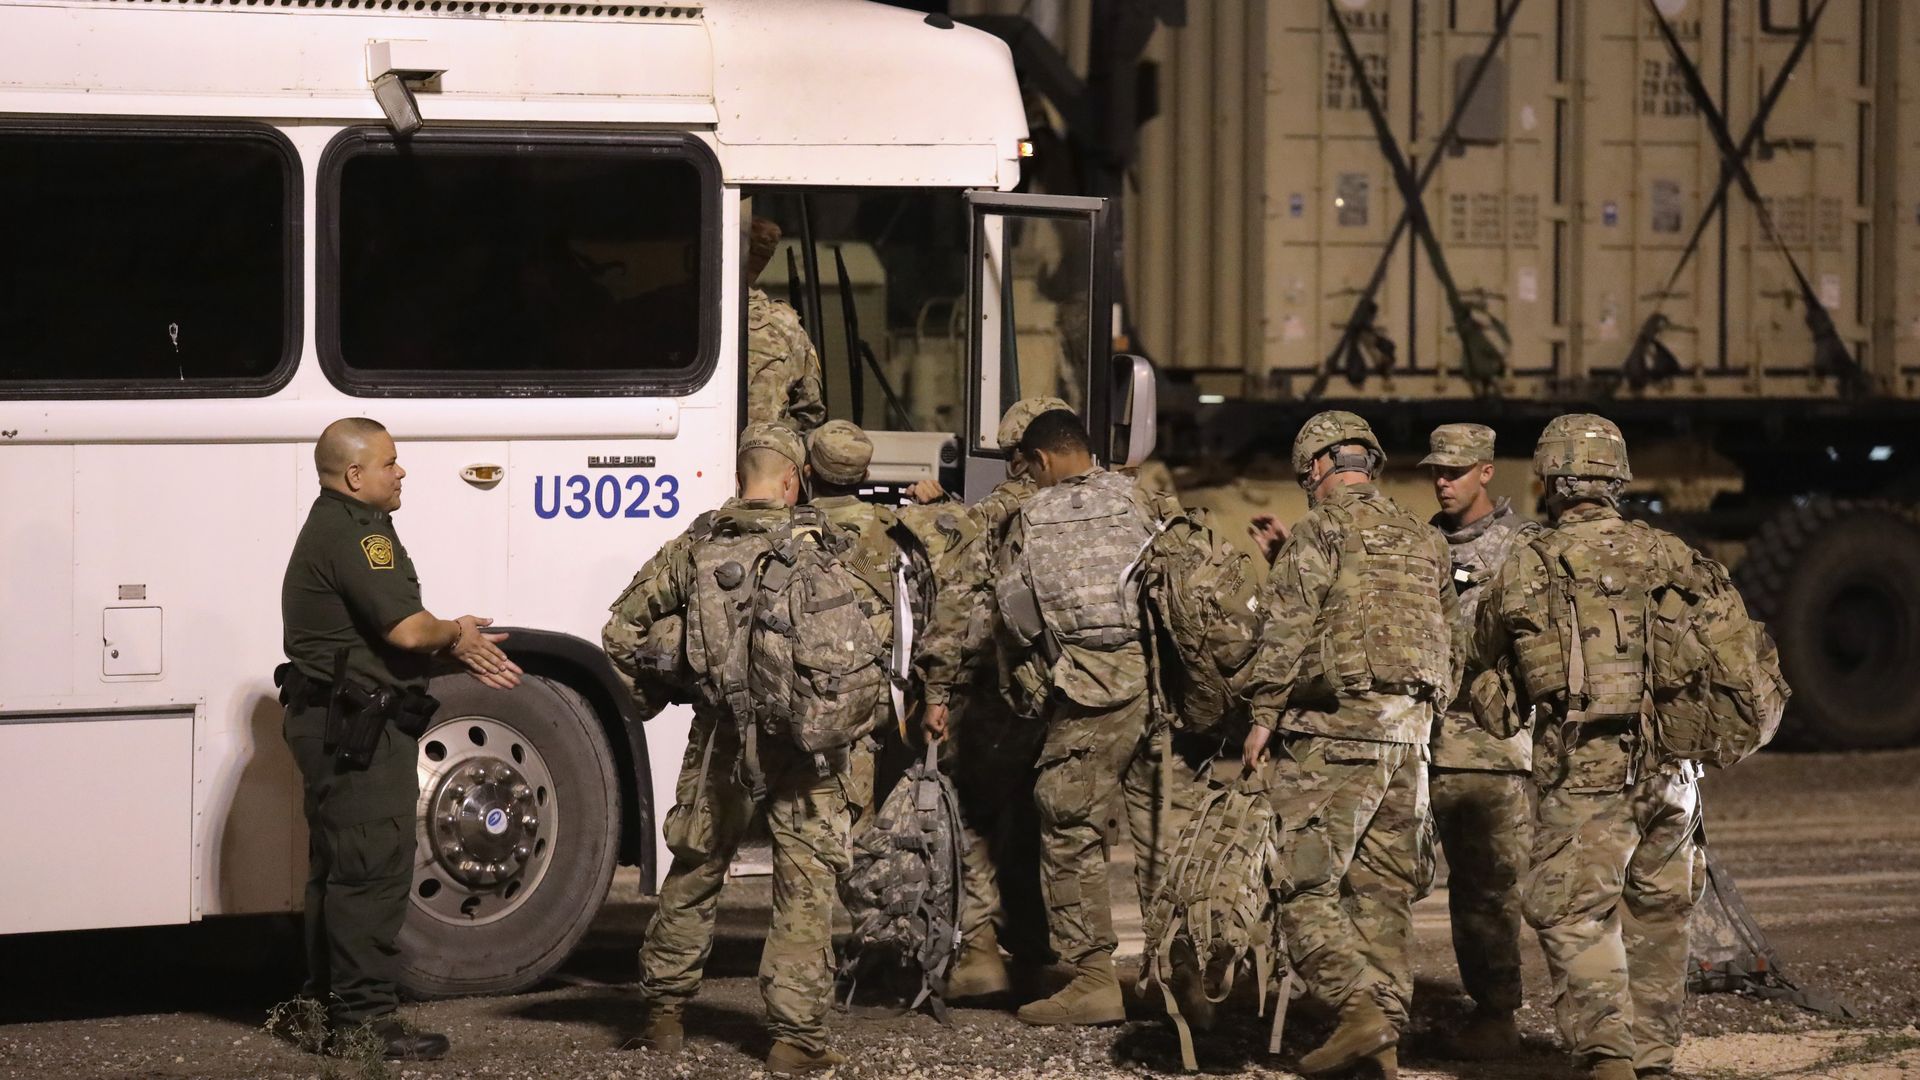 Troops at the border getting into a bus